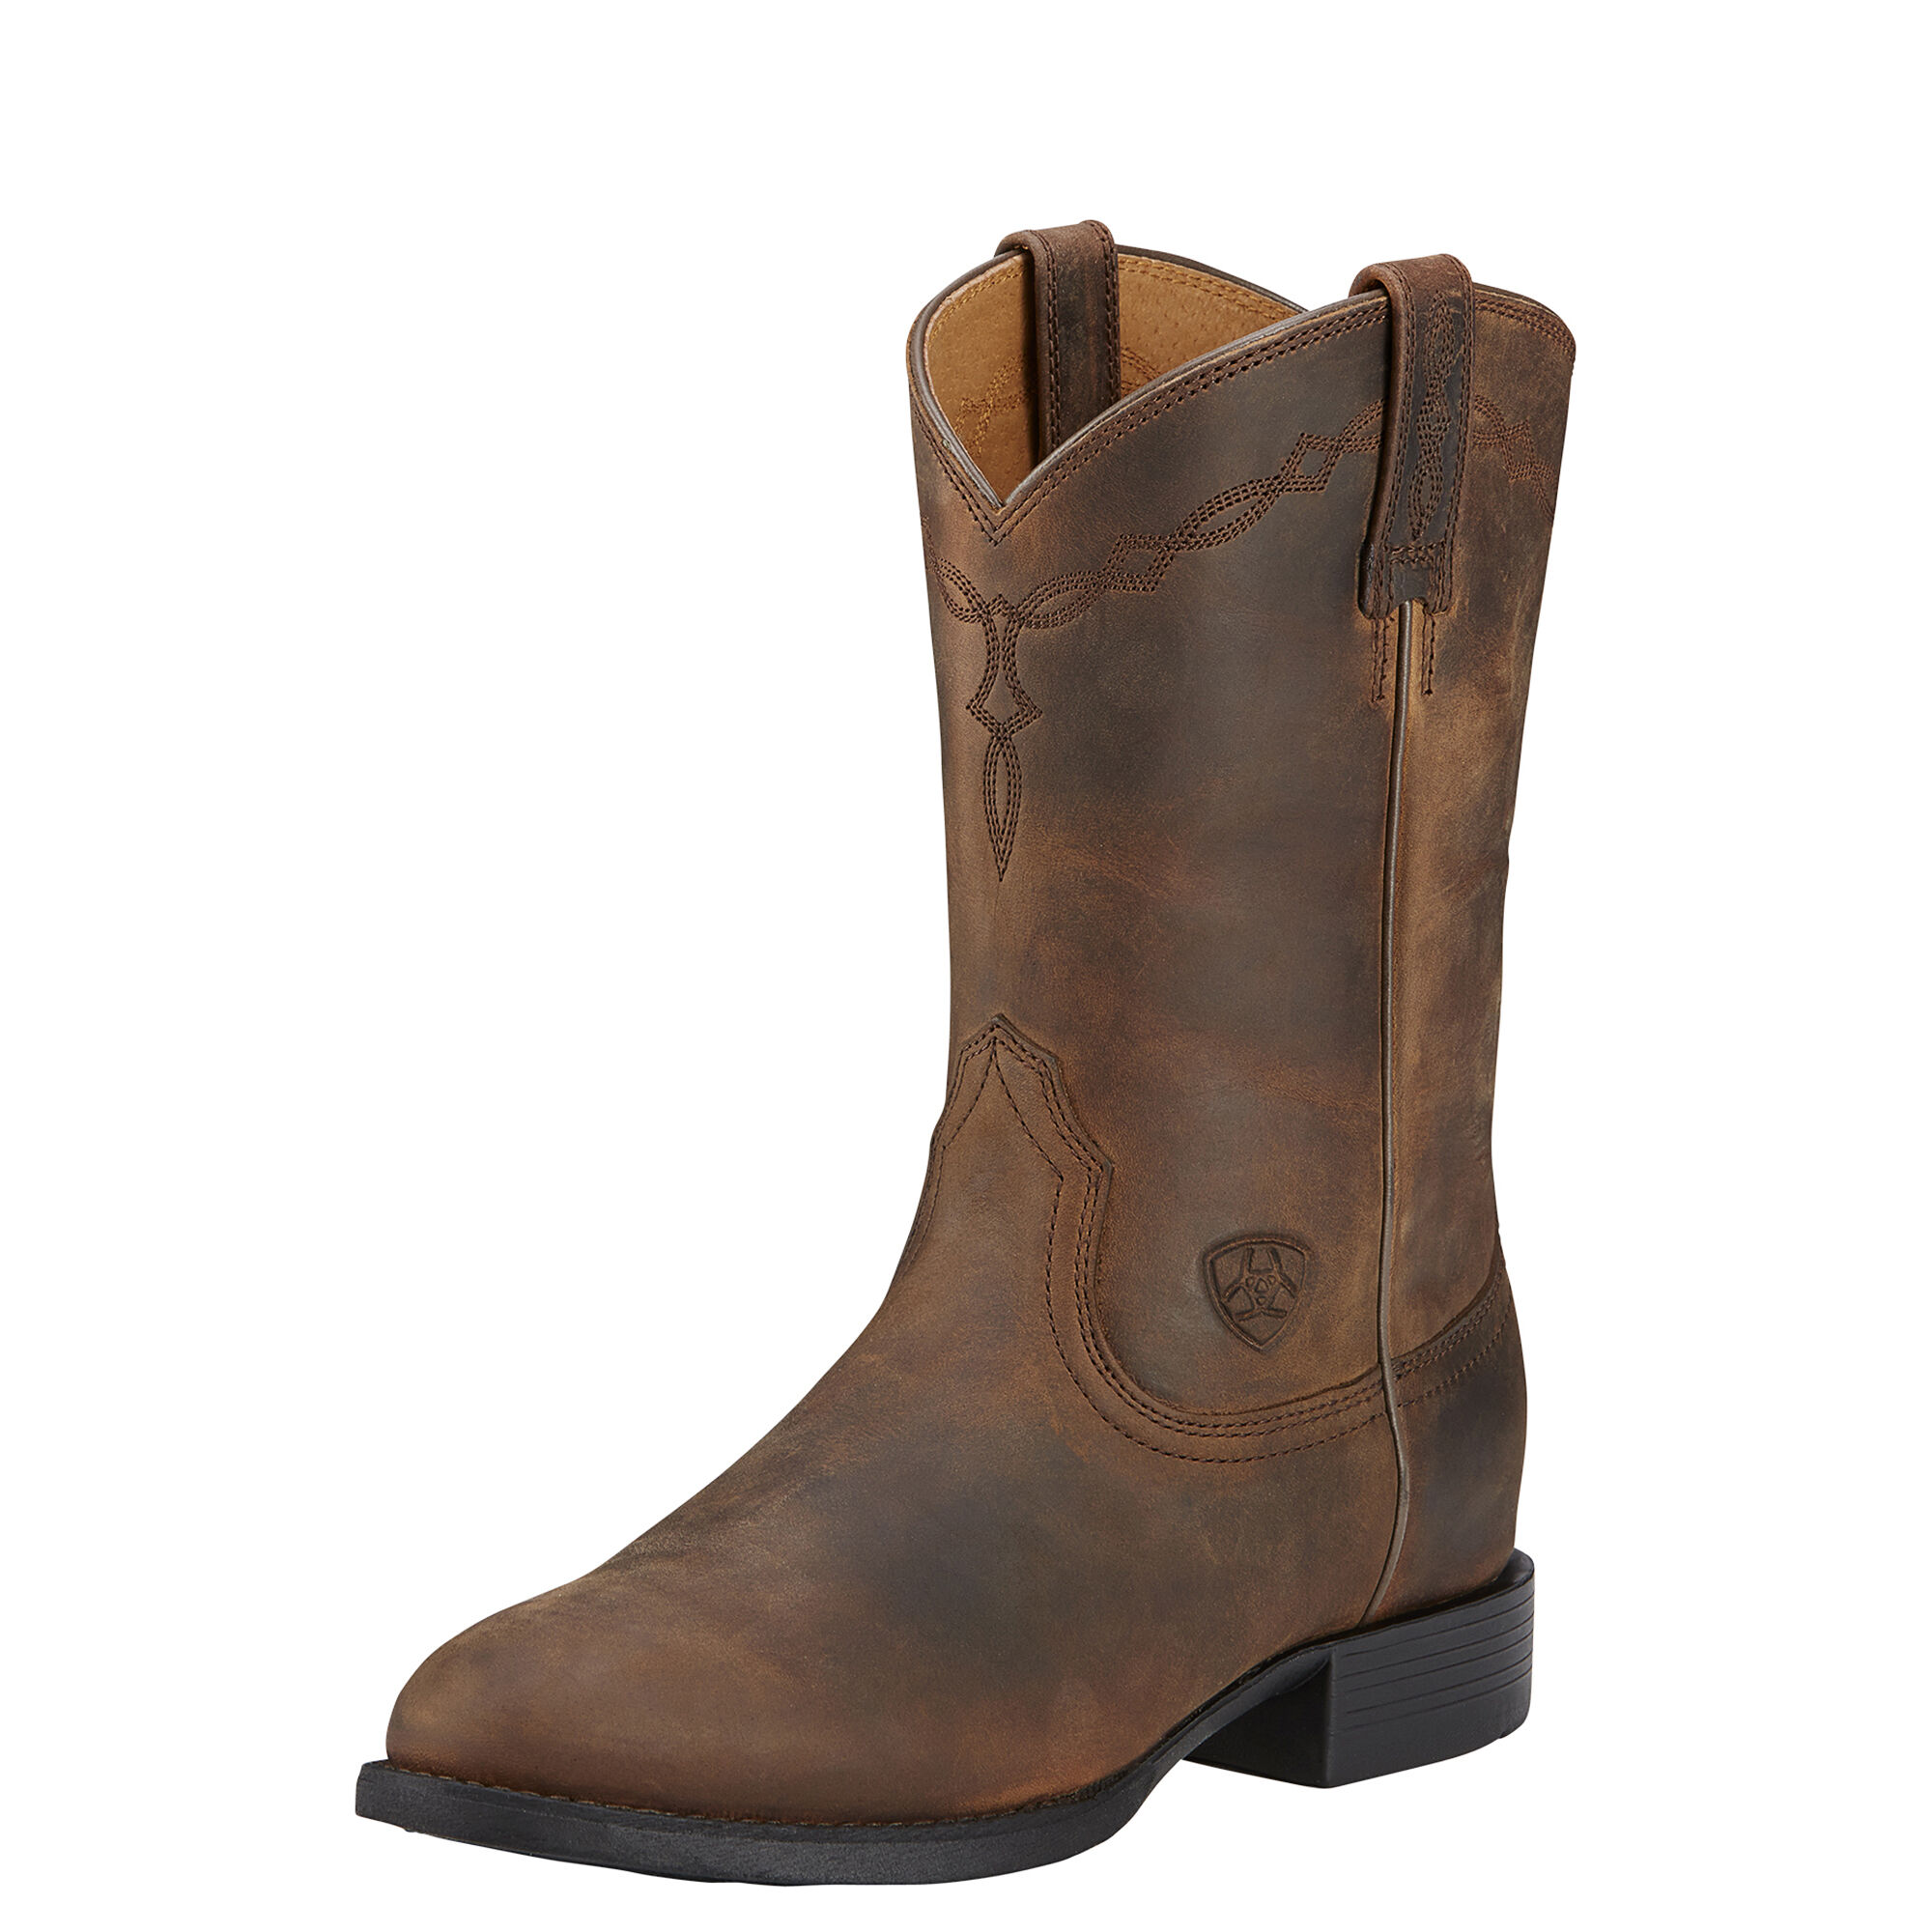 Women's Roper Boots \u0026 Lace Up Boots | Ariat